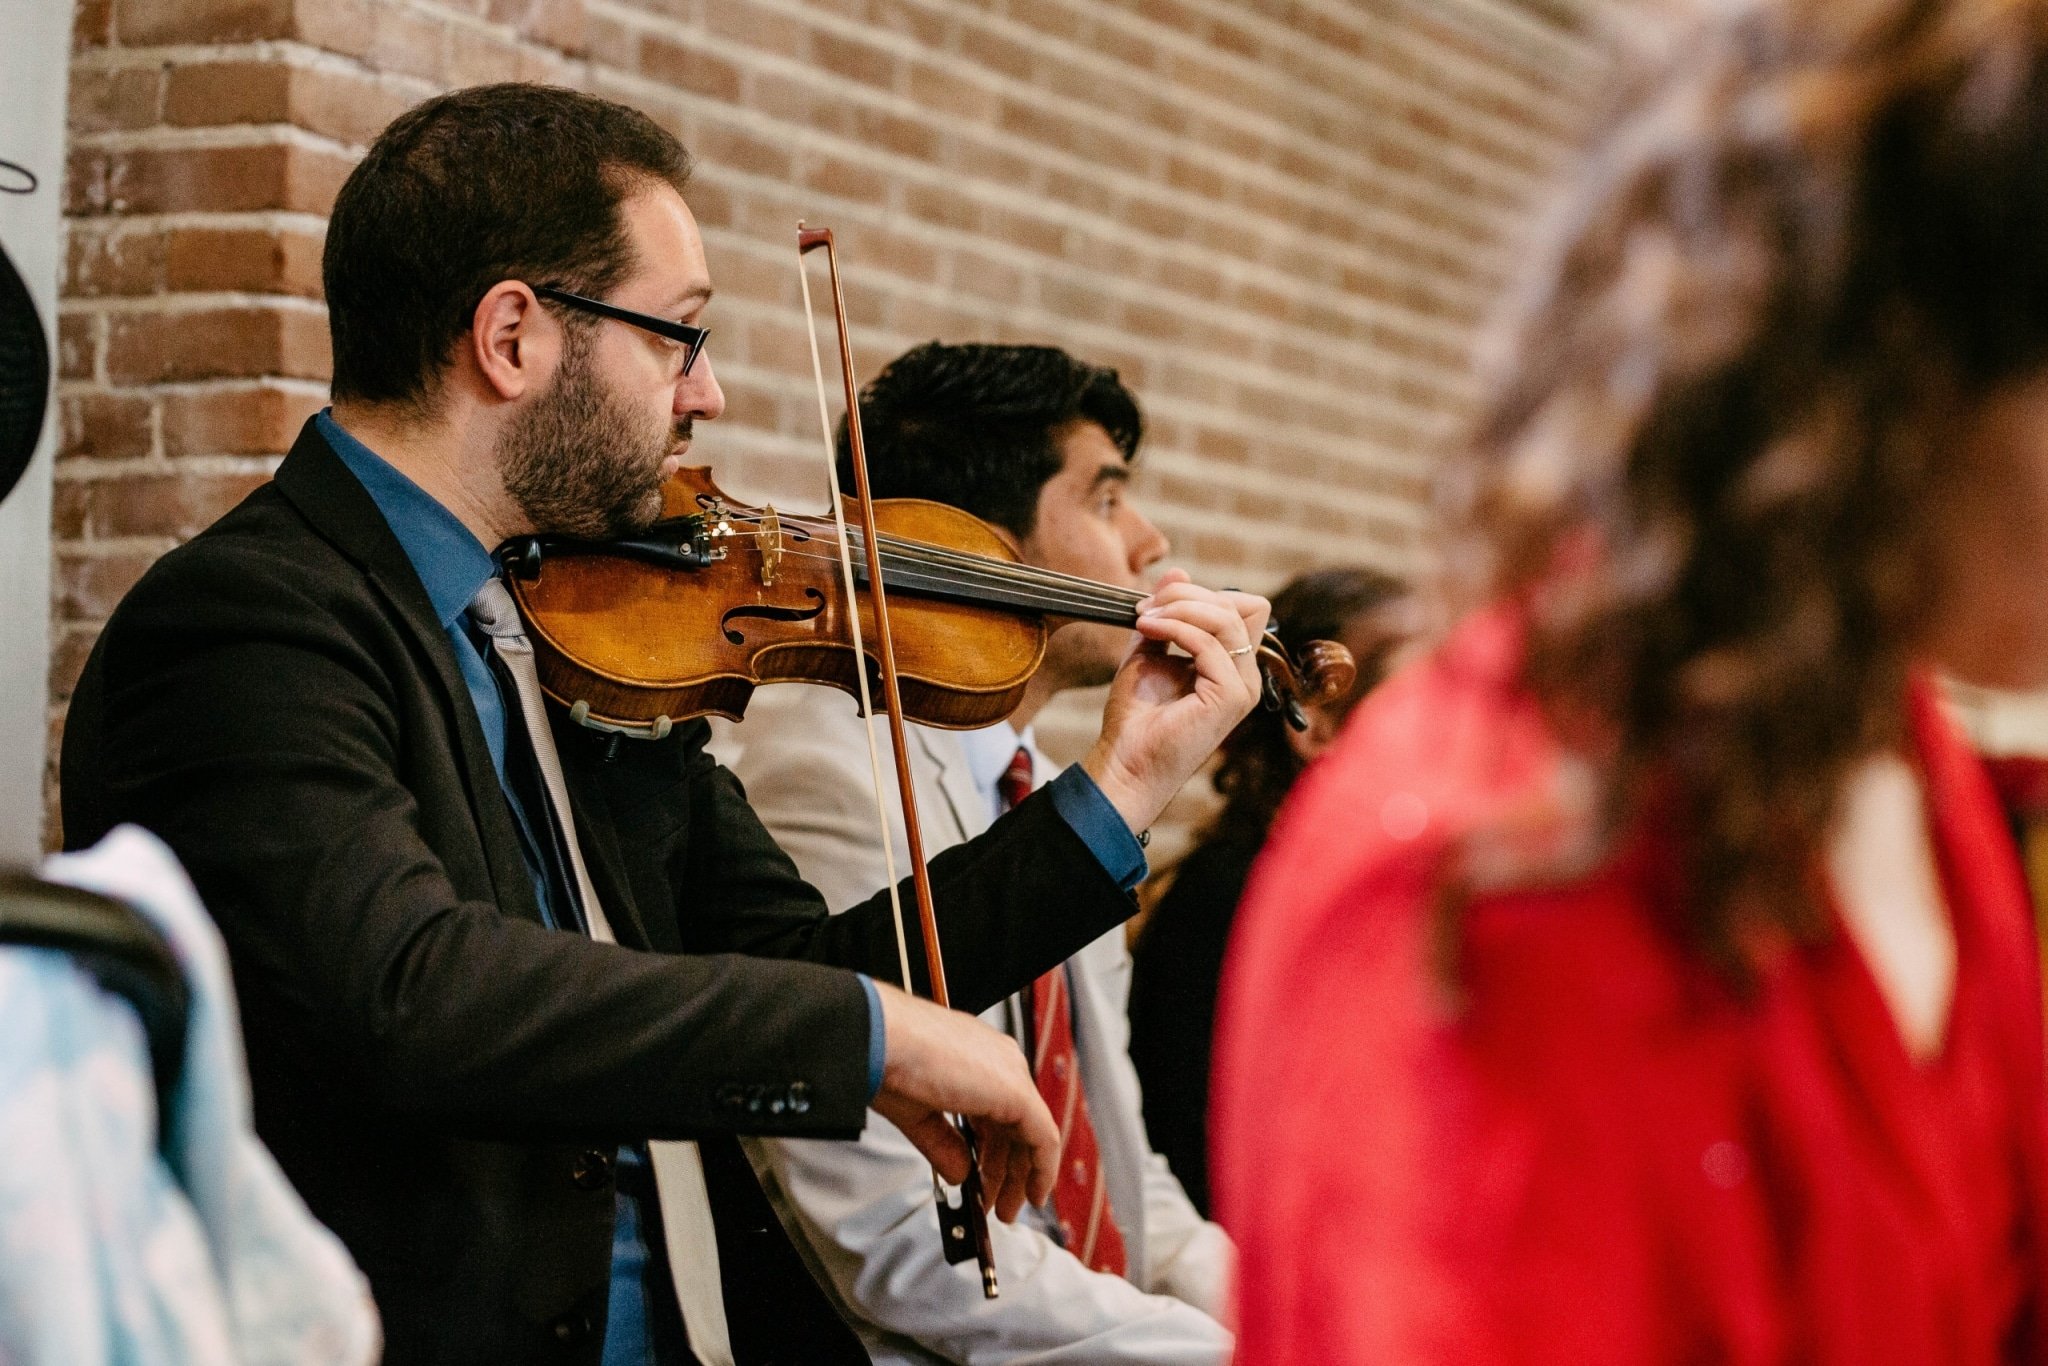 A man playing the violin for a group of people.